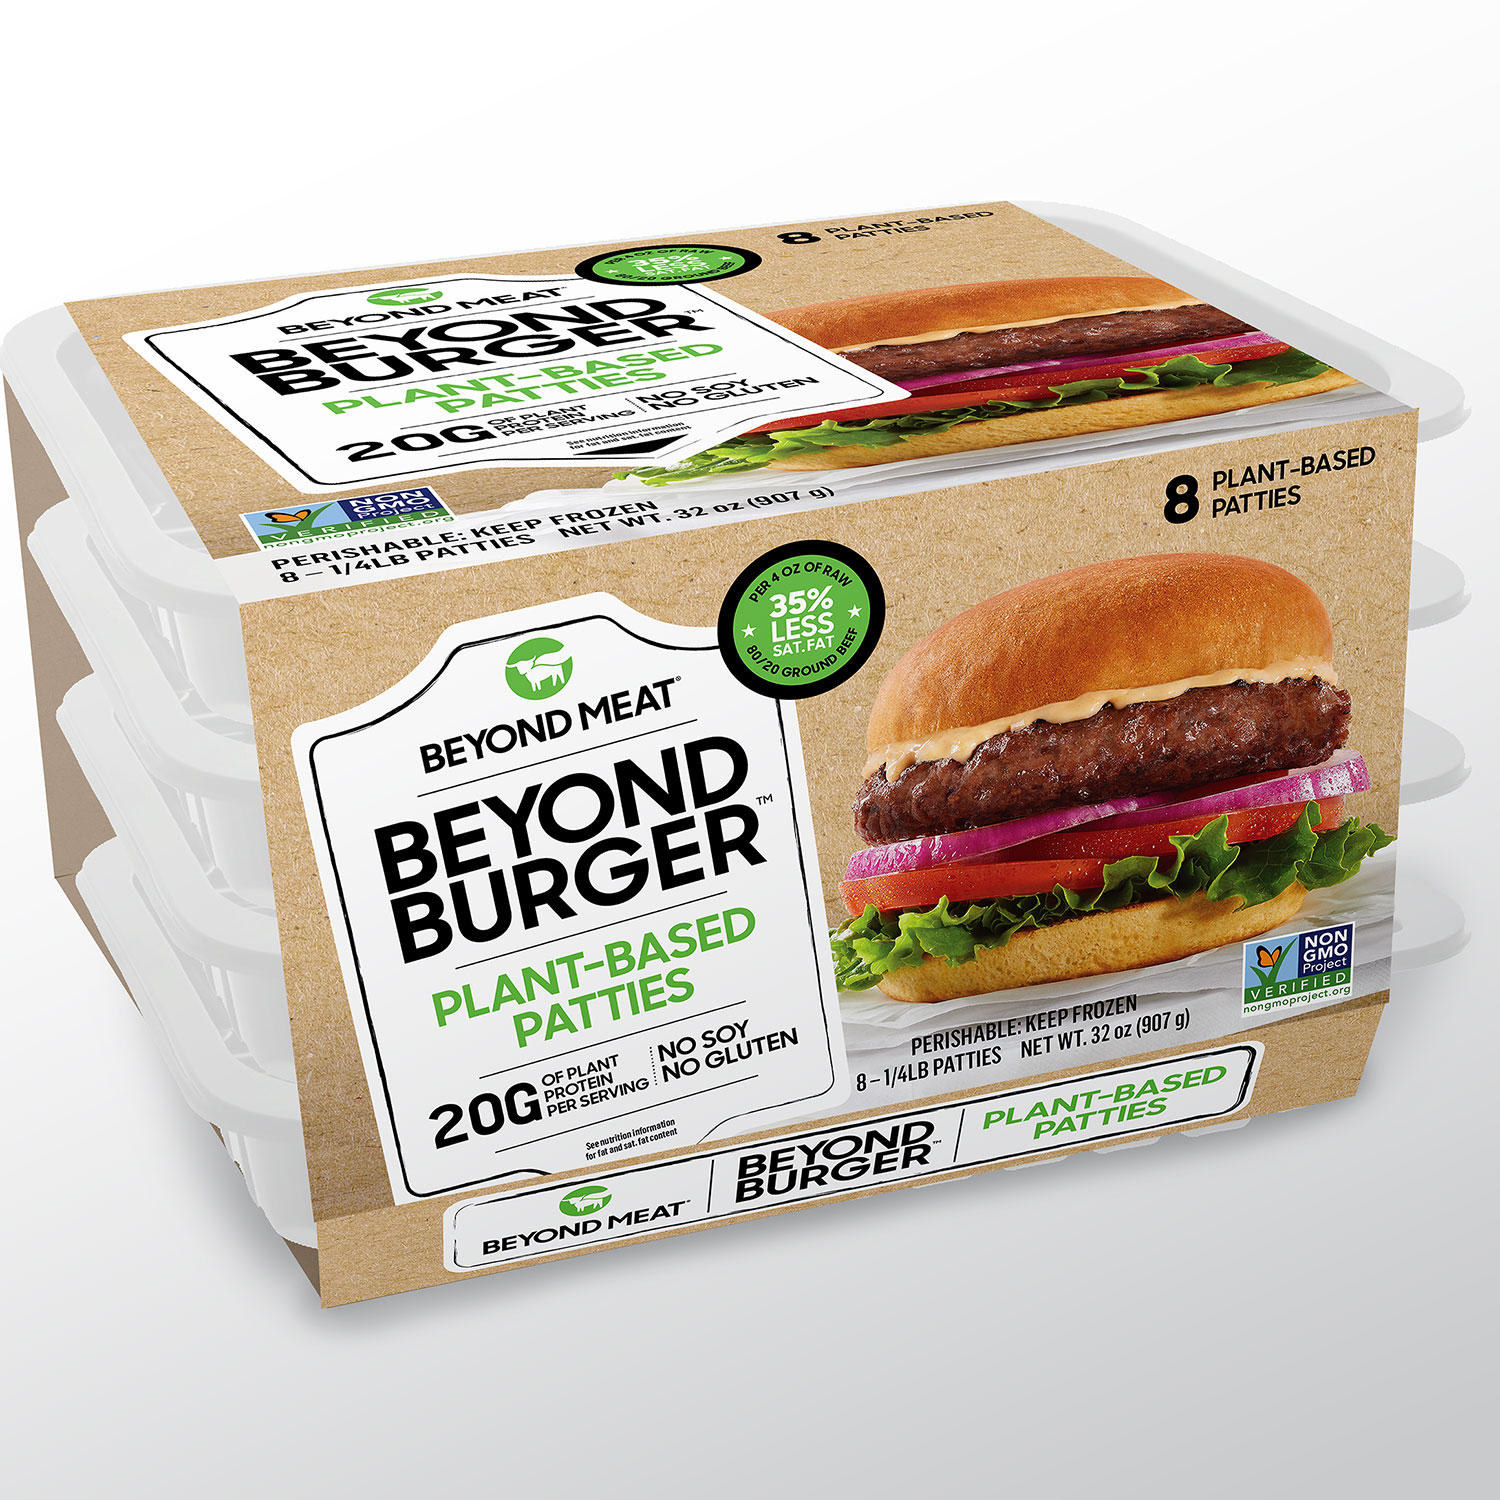 A package of Beyond Burgers